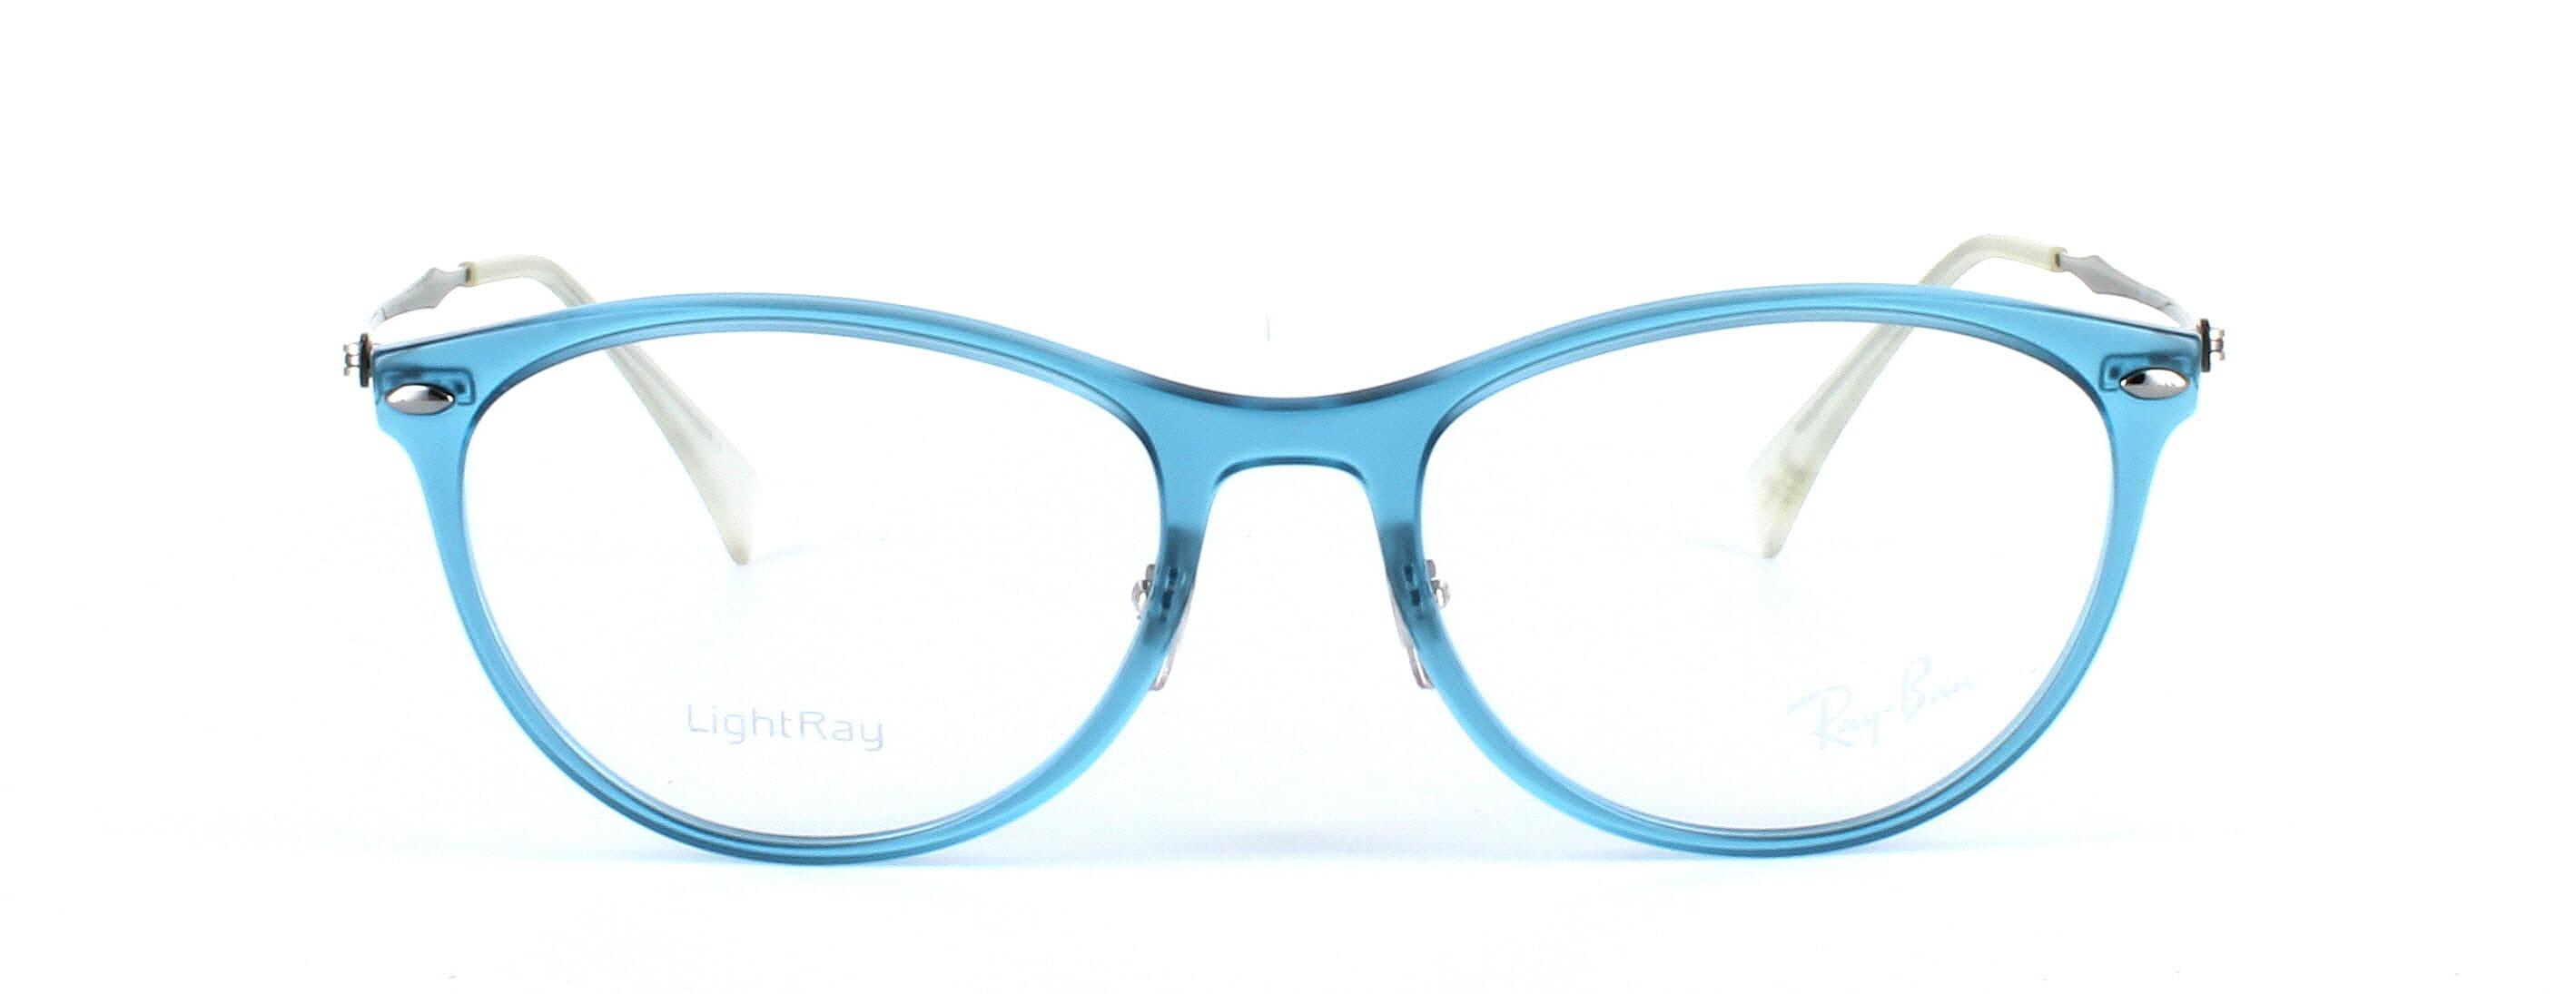 ray Ban 7160 - ladies acetate frame in blue - image view 5